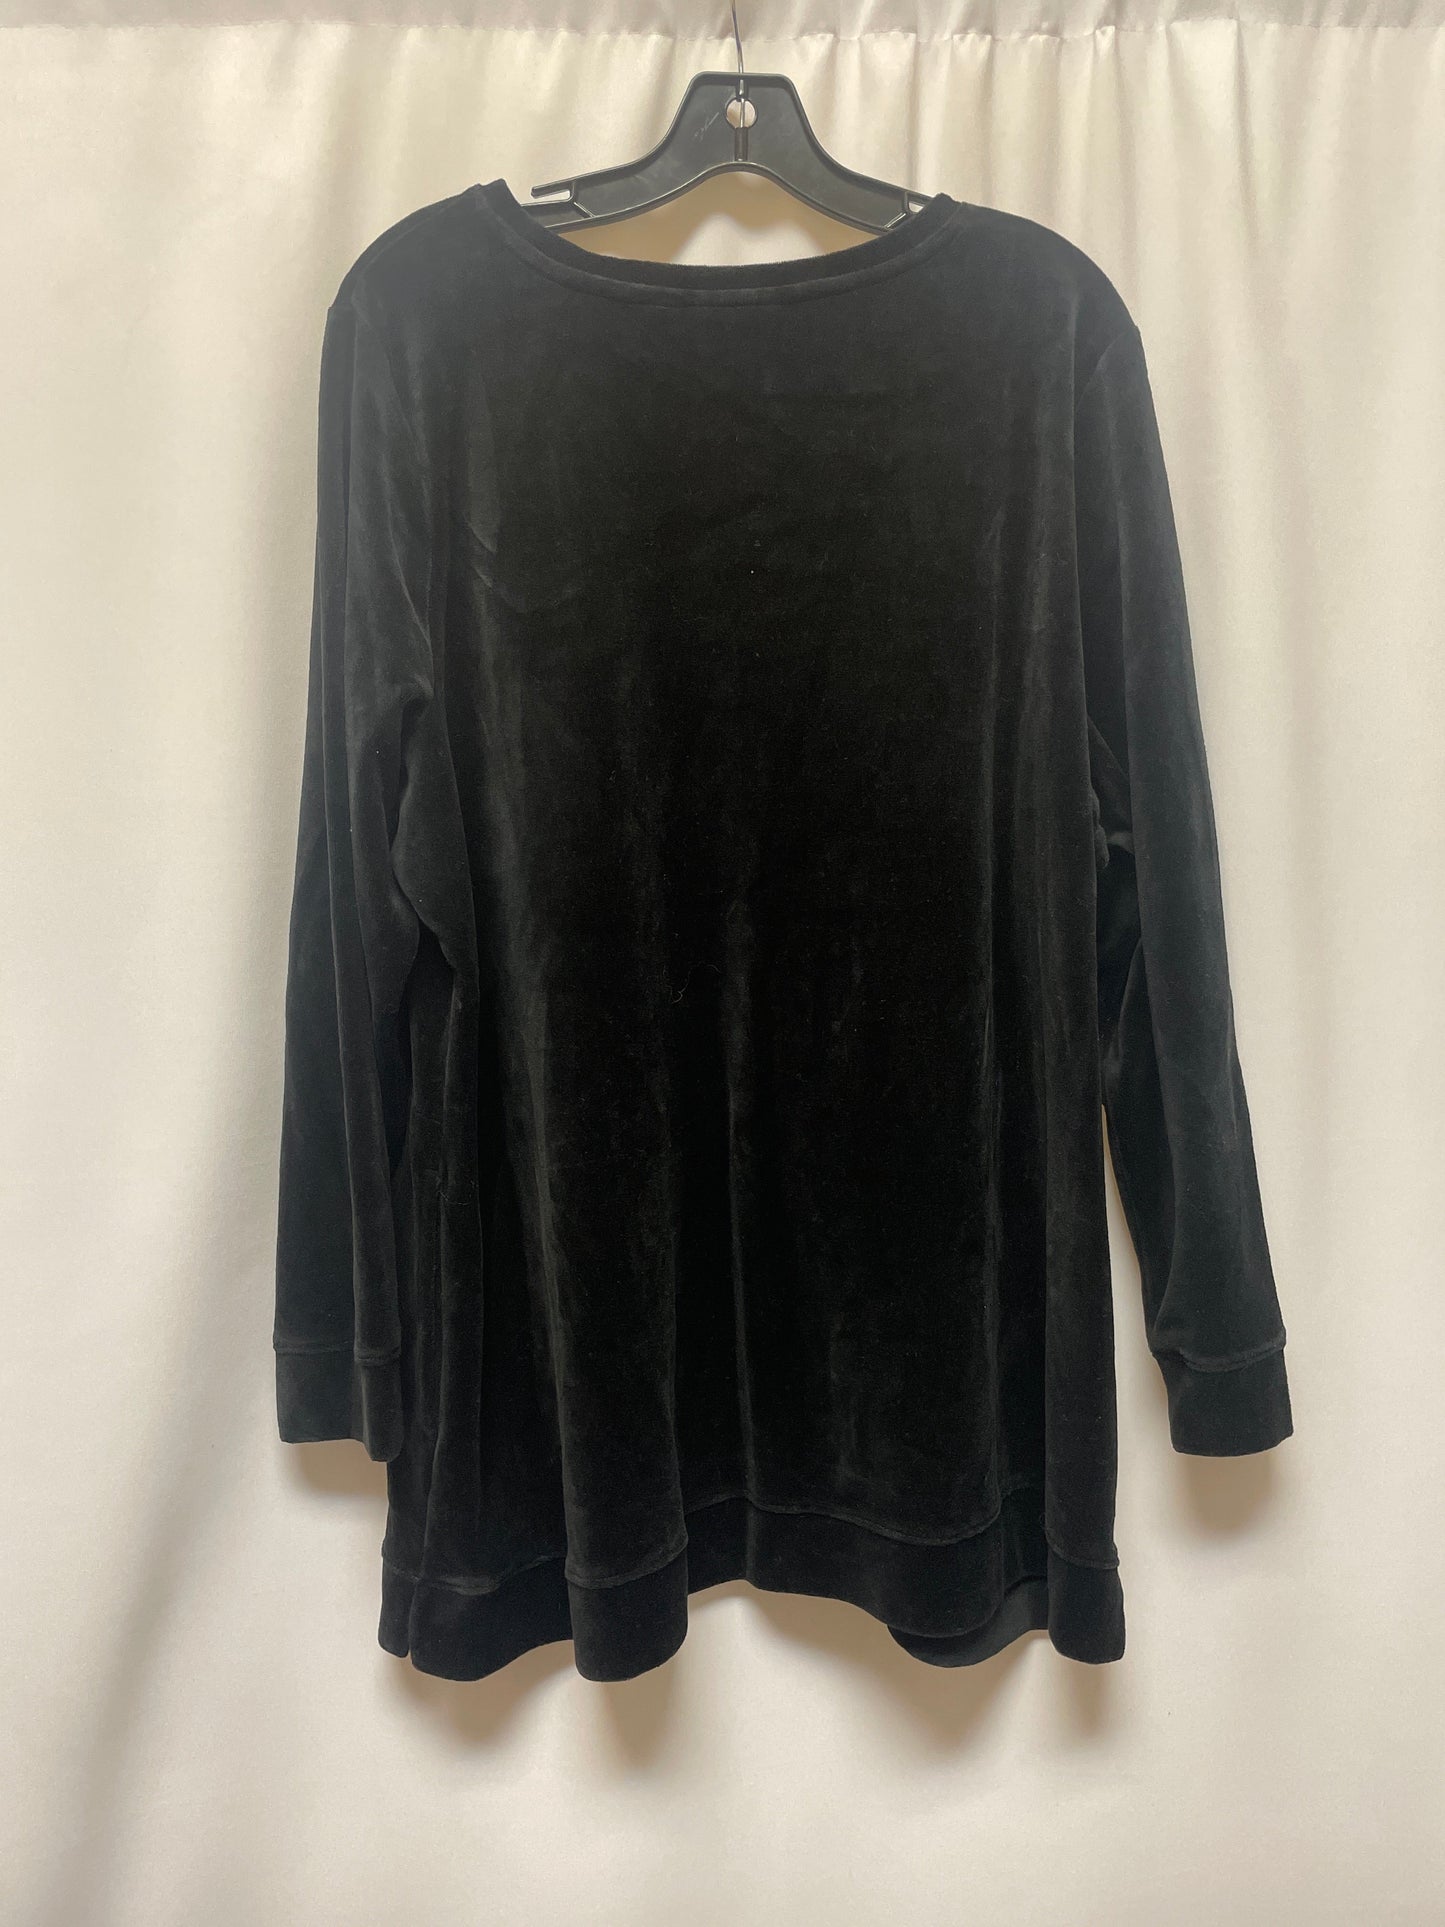 Black Top Long Sleeve Denim And Company, Size 1x